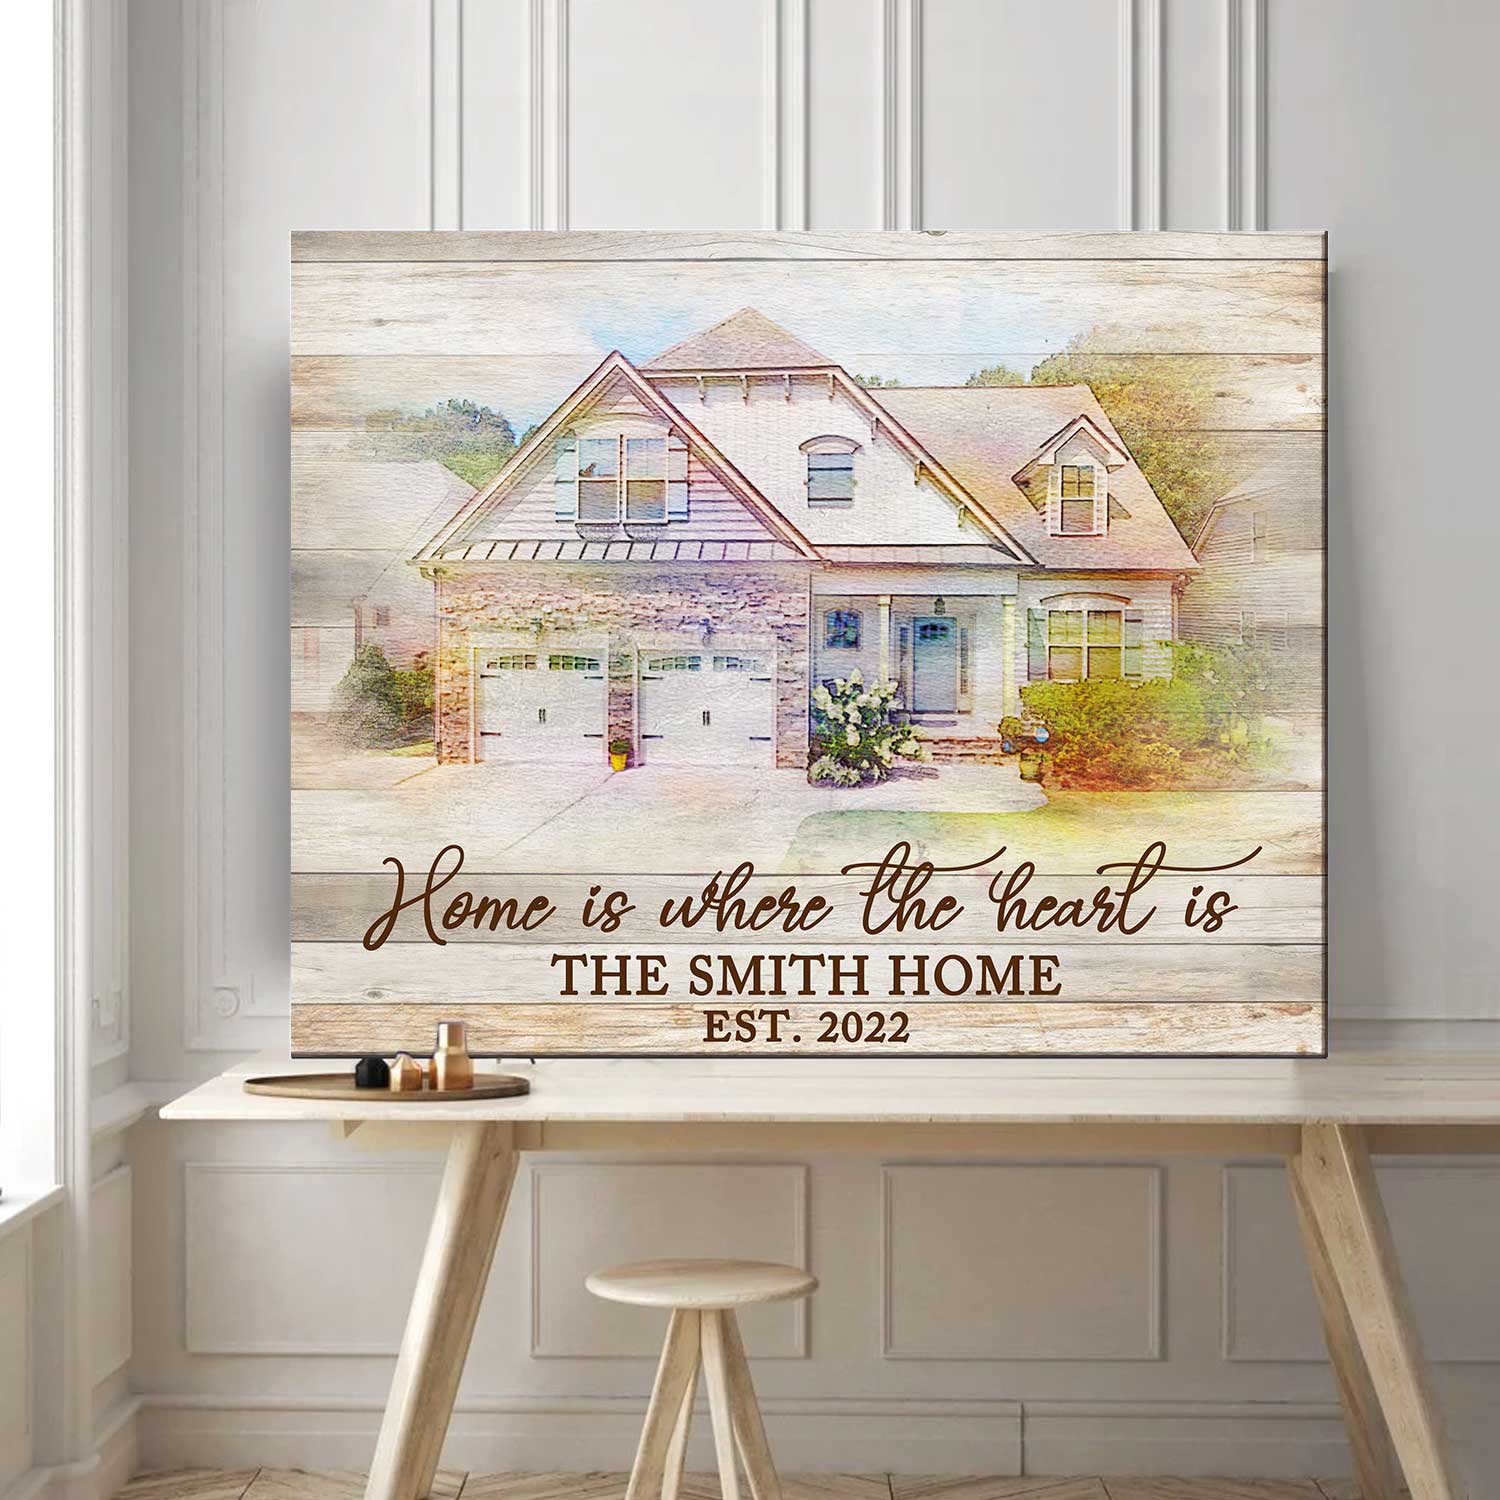 https://benicee.com/wp-content/uploads/2022/10/Housewarming-Personalized-Gifts-New-Homeowner-Gift-Personalized-Home-Portrait-From-Photo-4.jpg